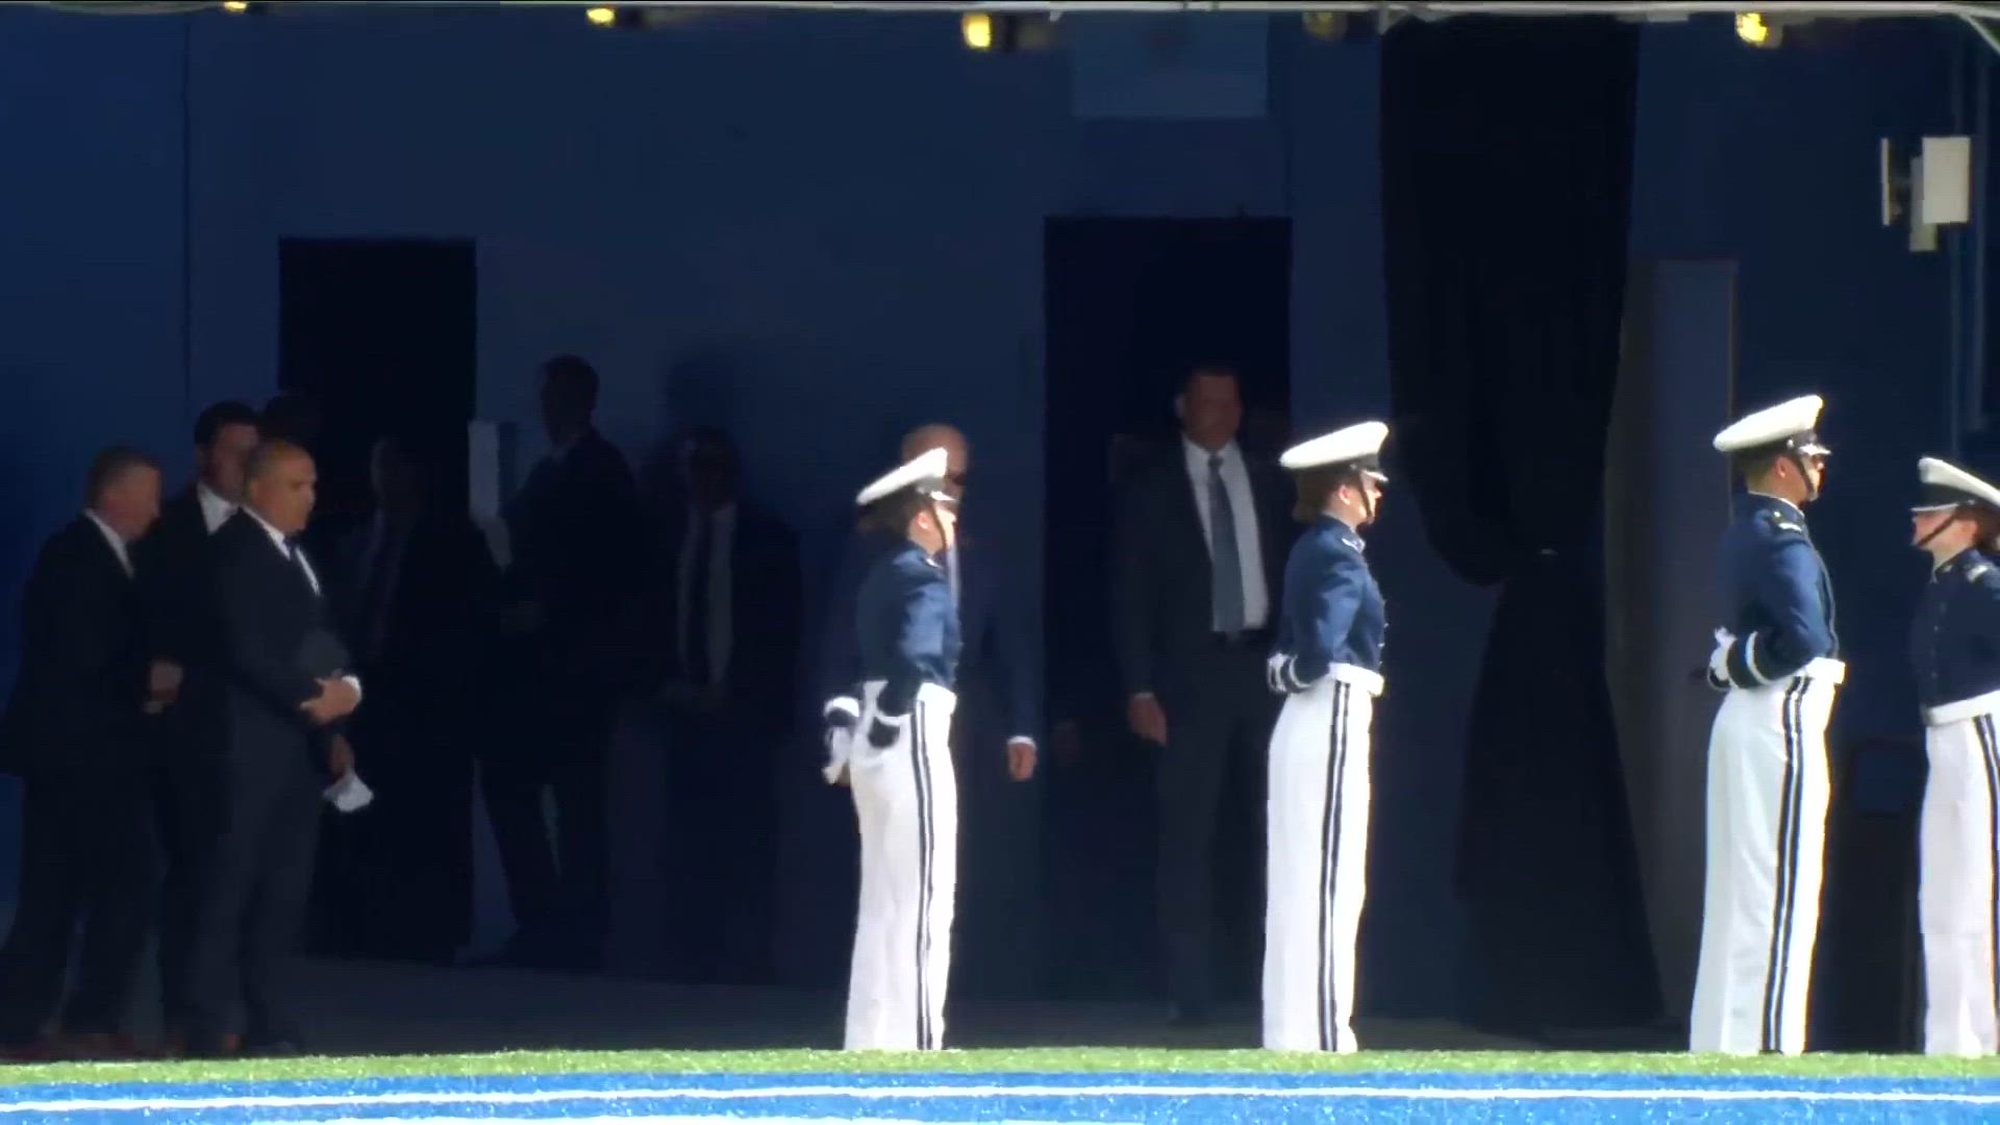 President Joe Biden delivers the Commencement Address at the United States Air Force Academy.